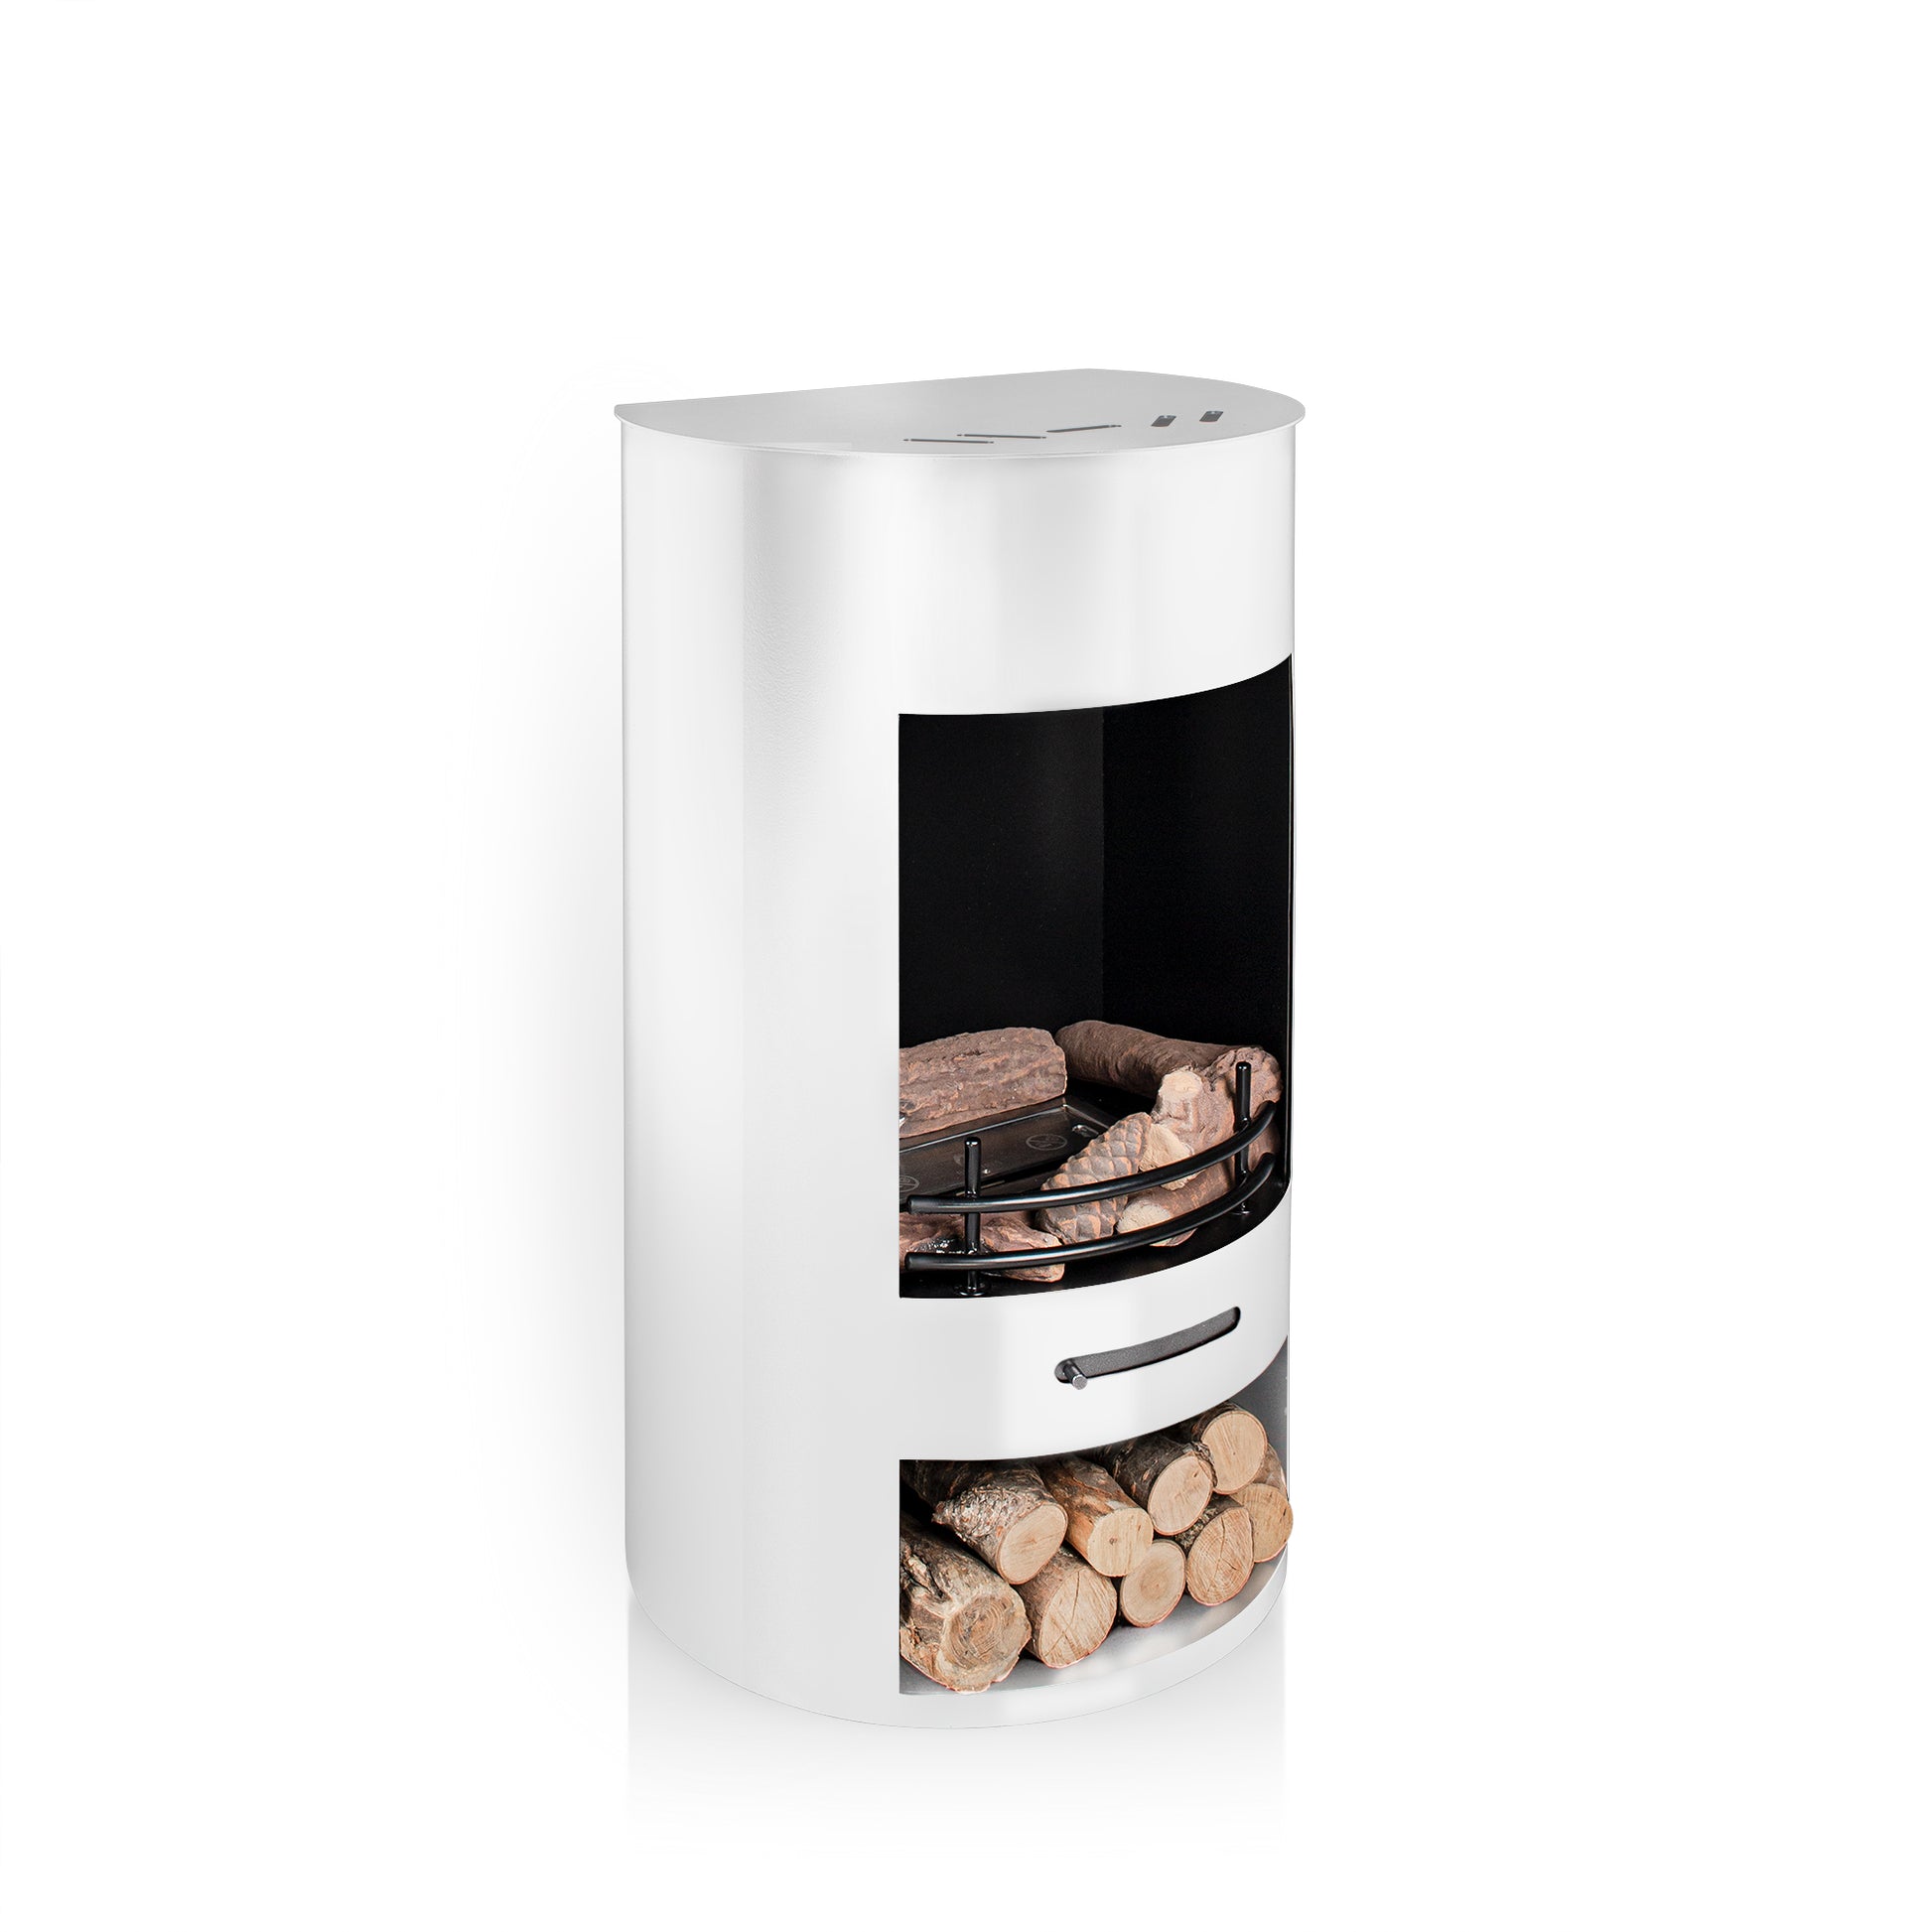 LUNA White Bioethanol Stove with ceramic logs and real wood logs at the bottom